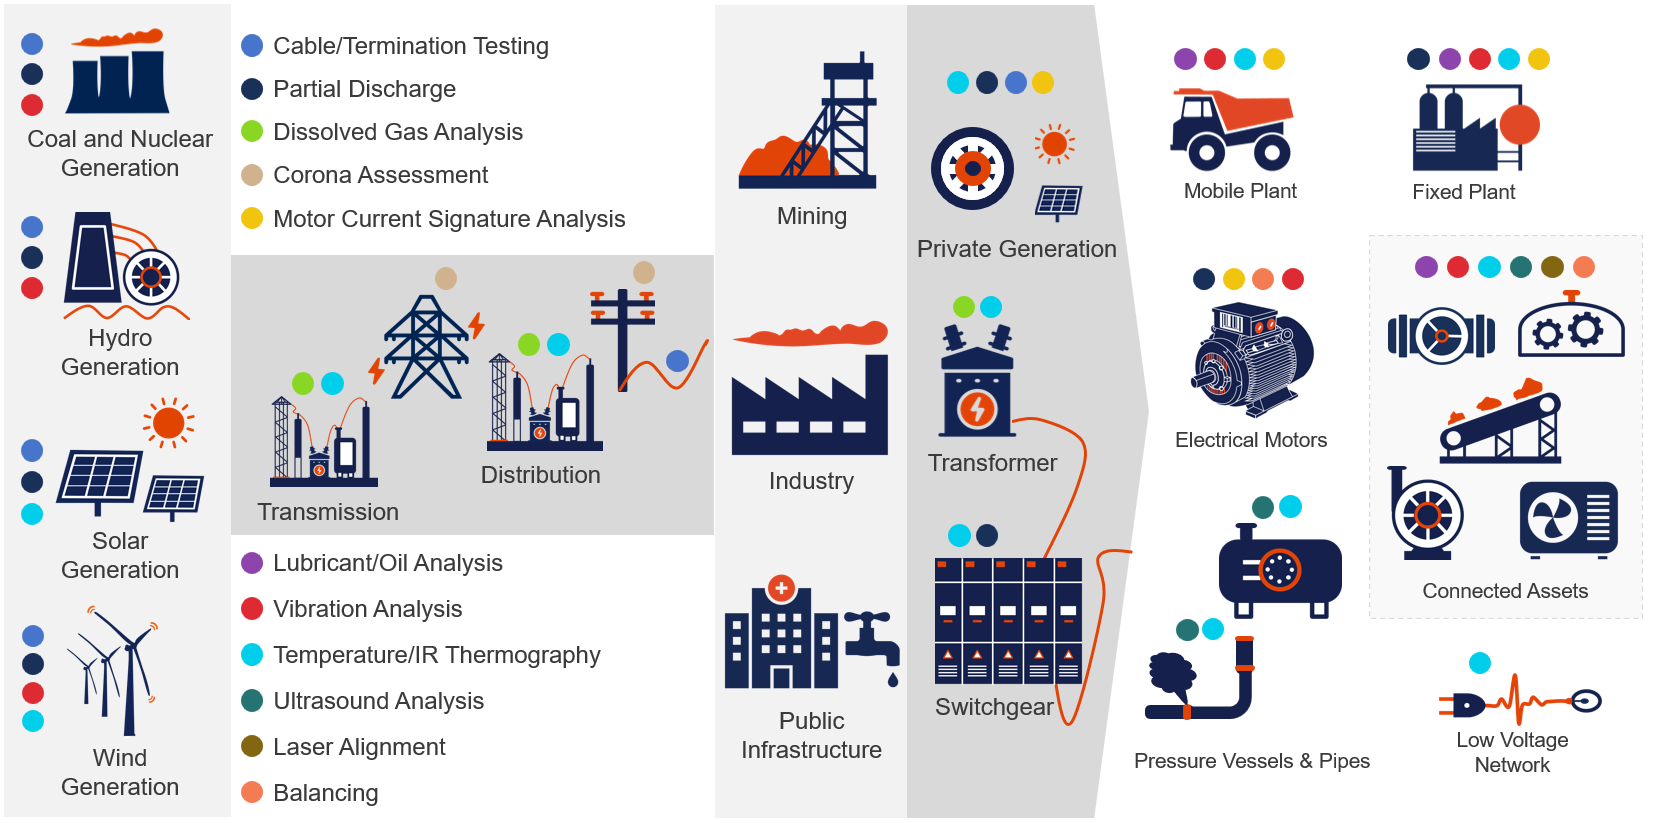 Overview of typical condition monitoring technologies per asset type